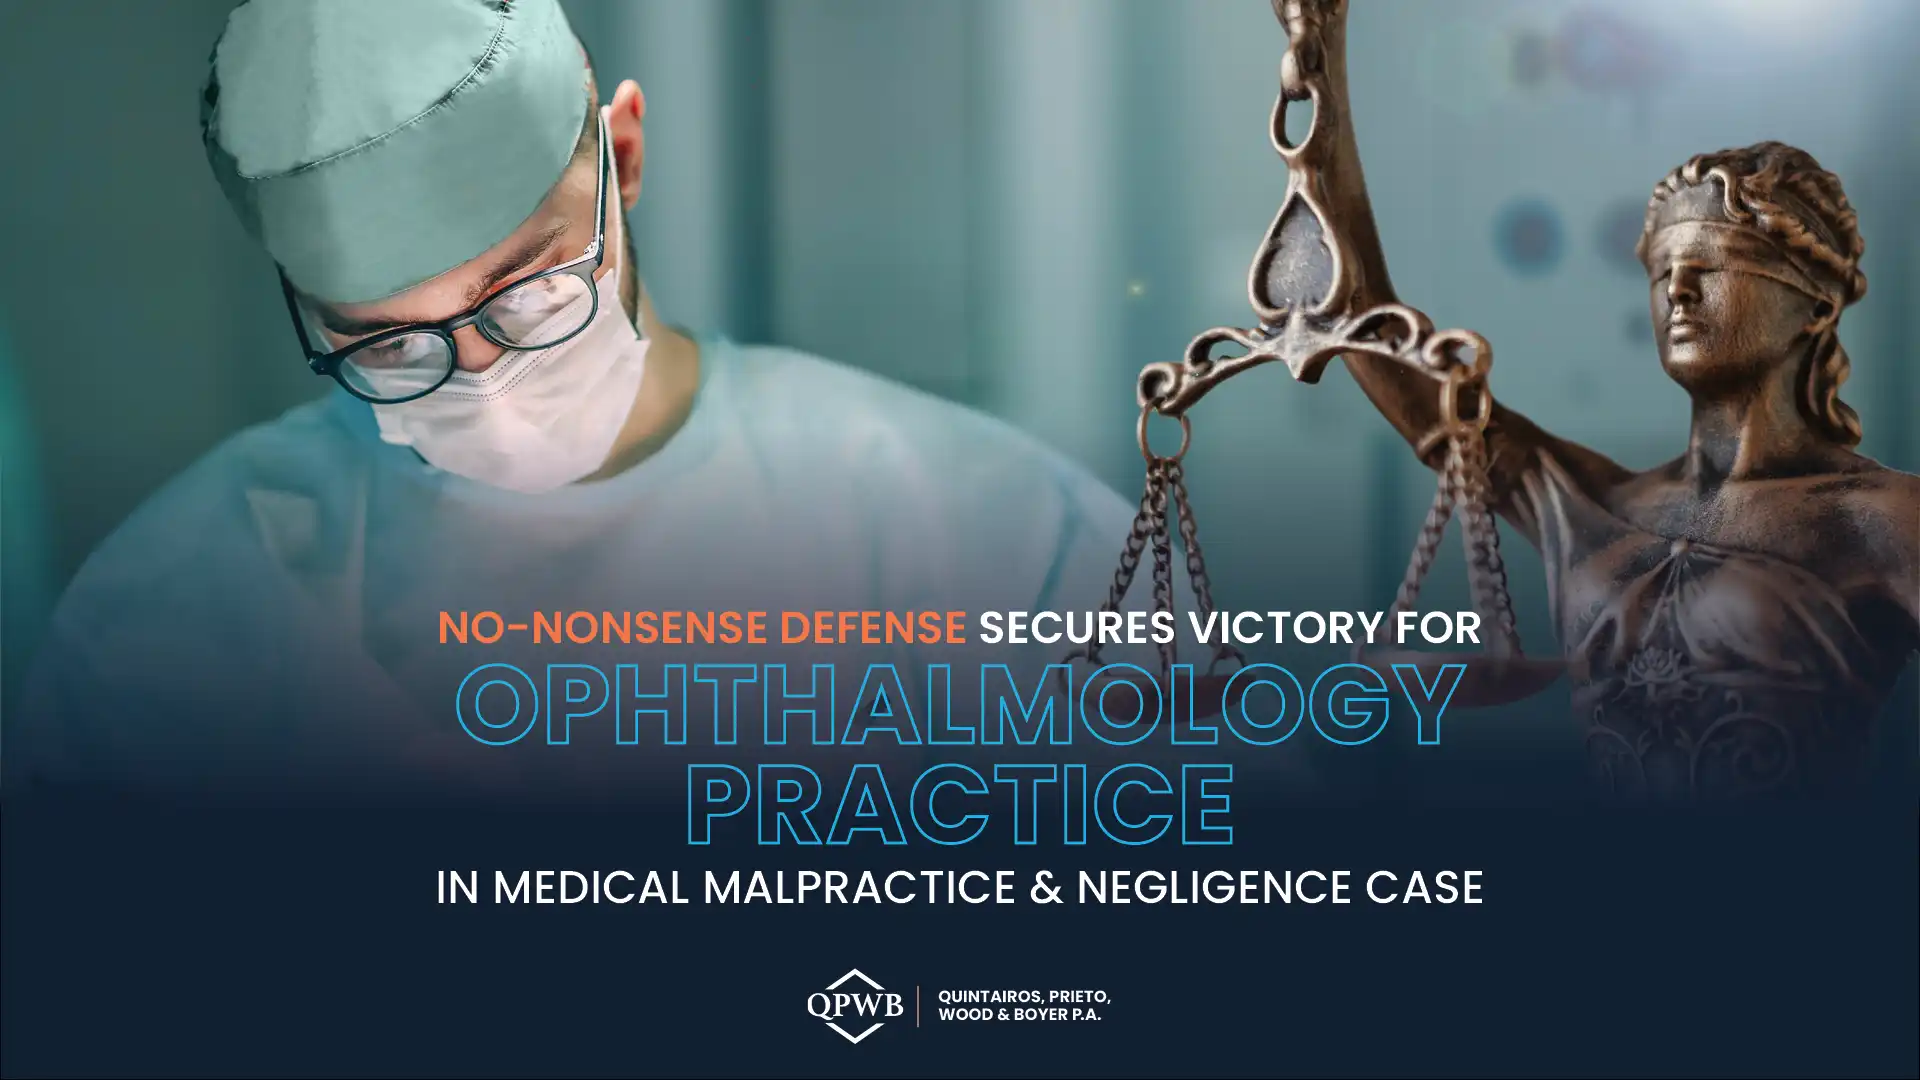 No Nonsense Defense Secures Victory for Ophthalmology Practice In Medical Malpractice & Negligence Case